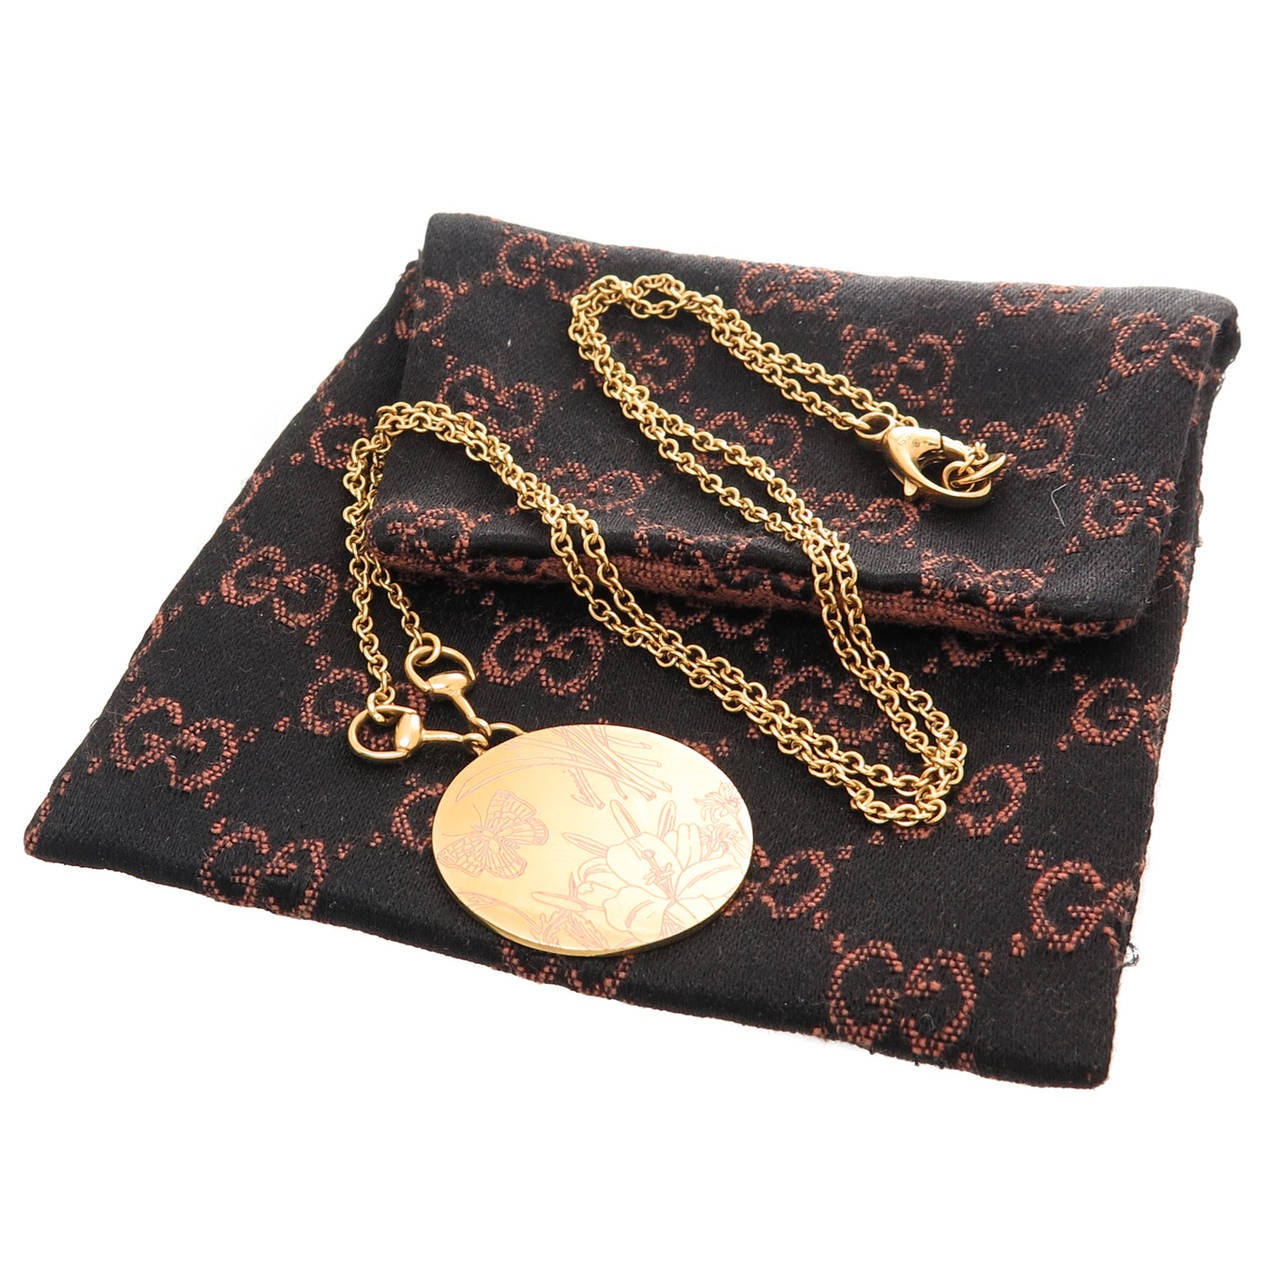 Circa 2005 Gucci 18K Yellow Gold 1 inch, 2 sided Floral Disk Pendant on a 20 inch link chain with Horse Bit connections. Signed, numbered and with Gucci Gift Pouch.